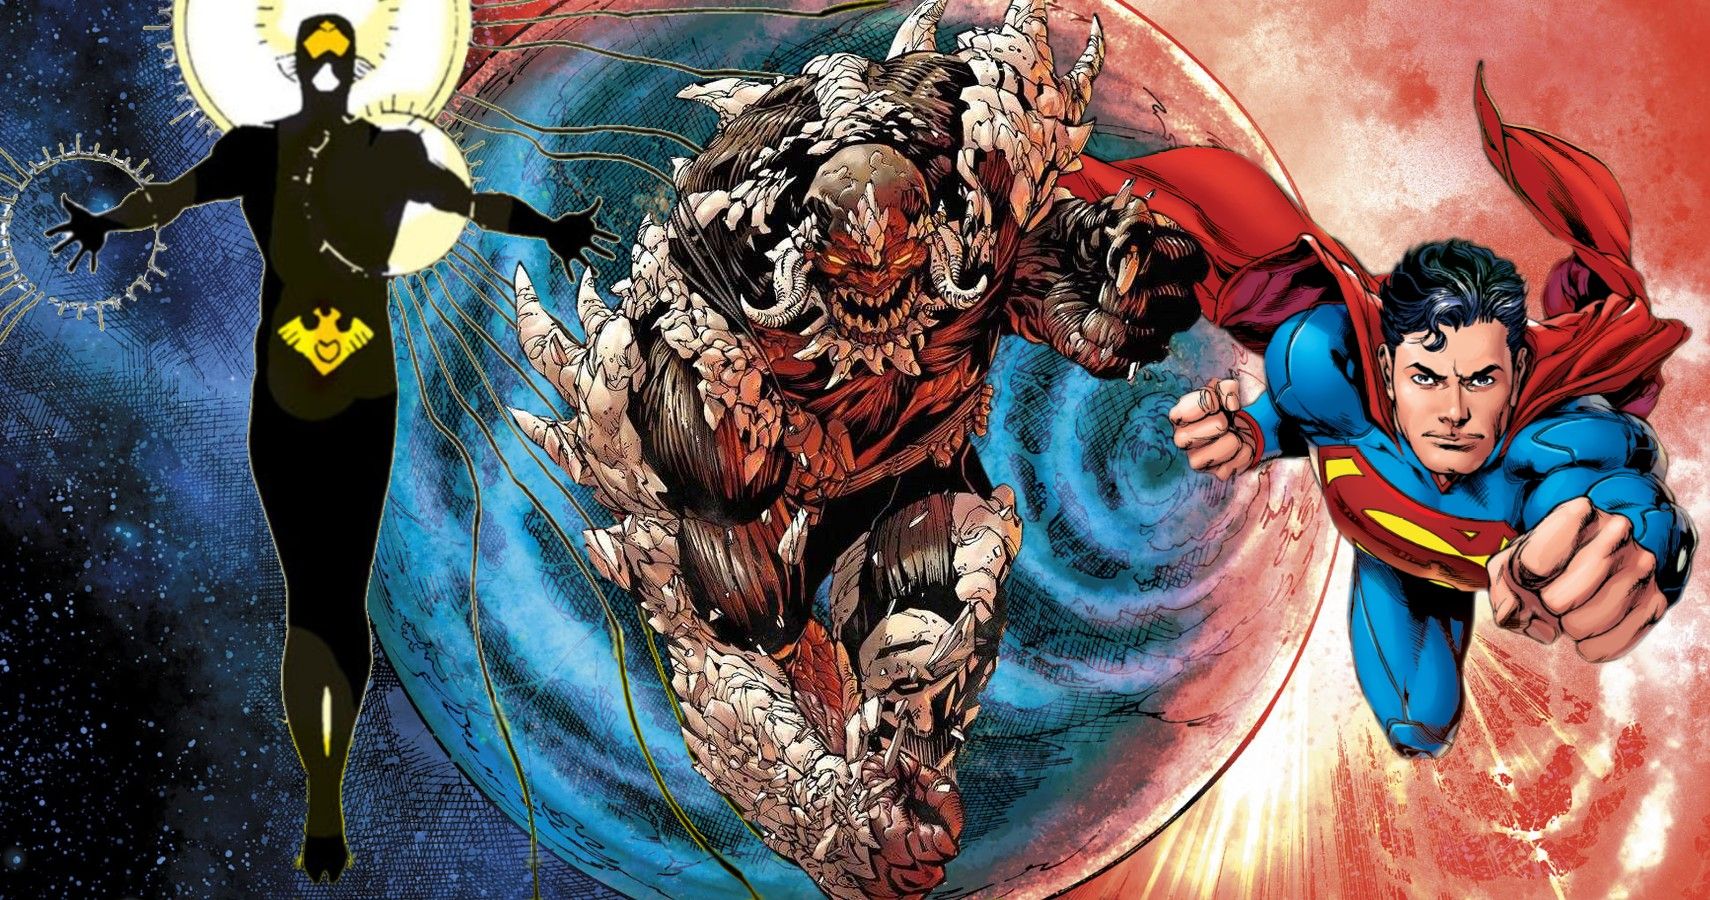 Facts about Superman's home planet Krypton